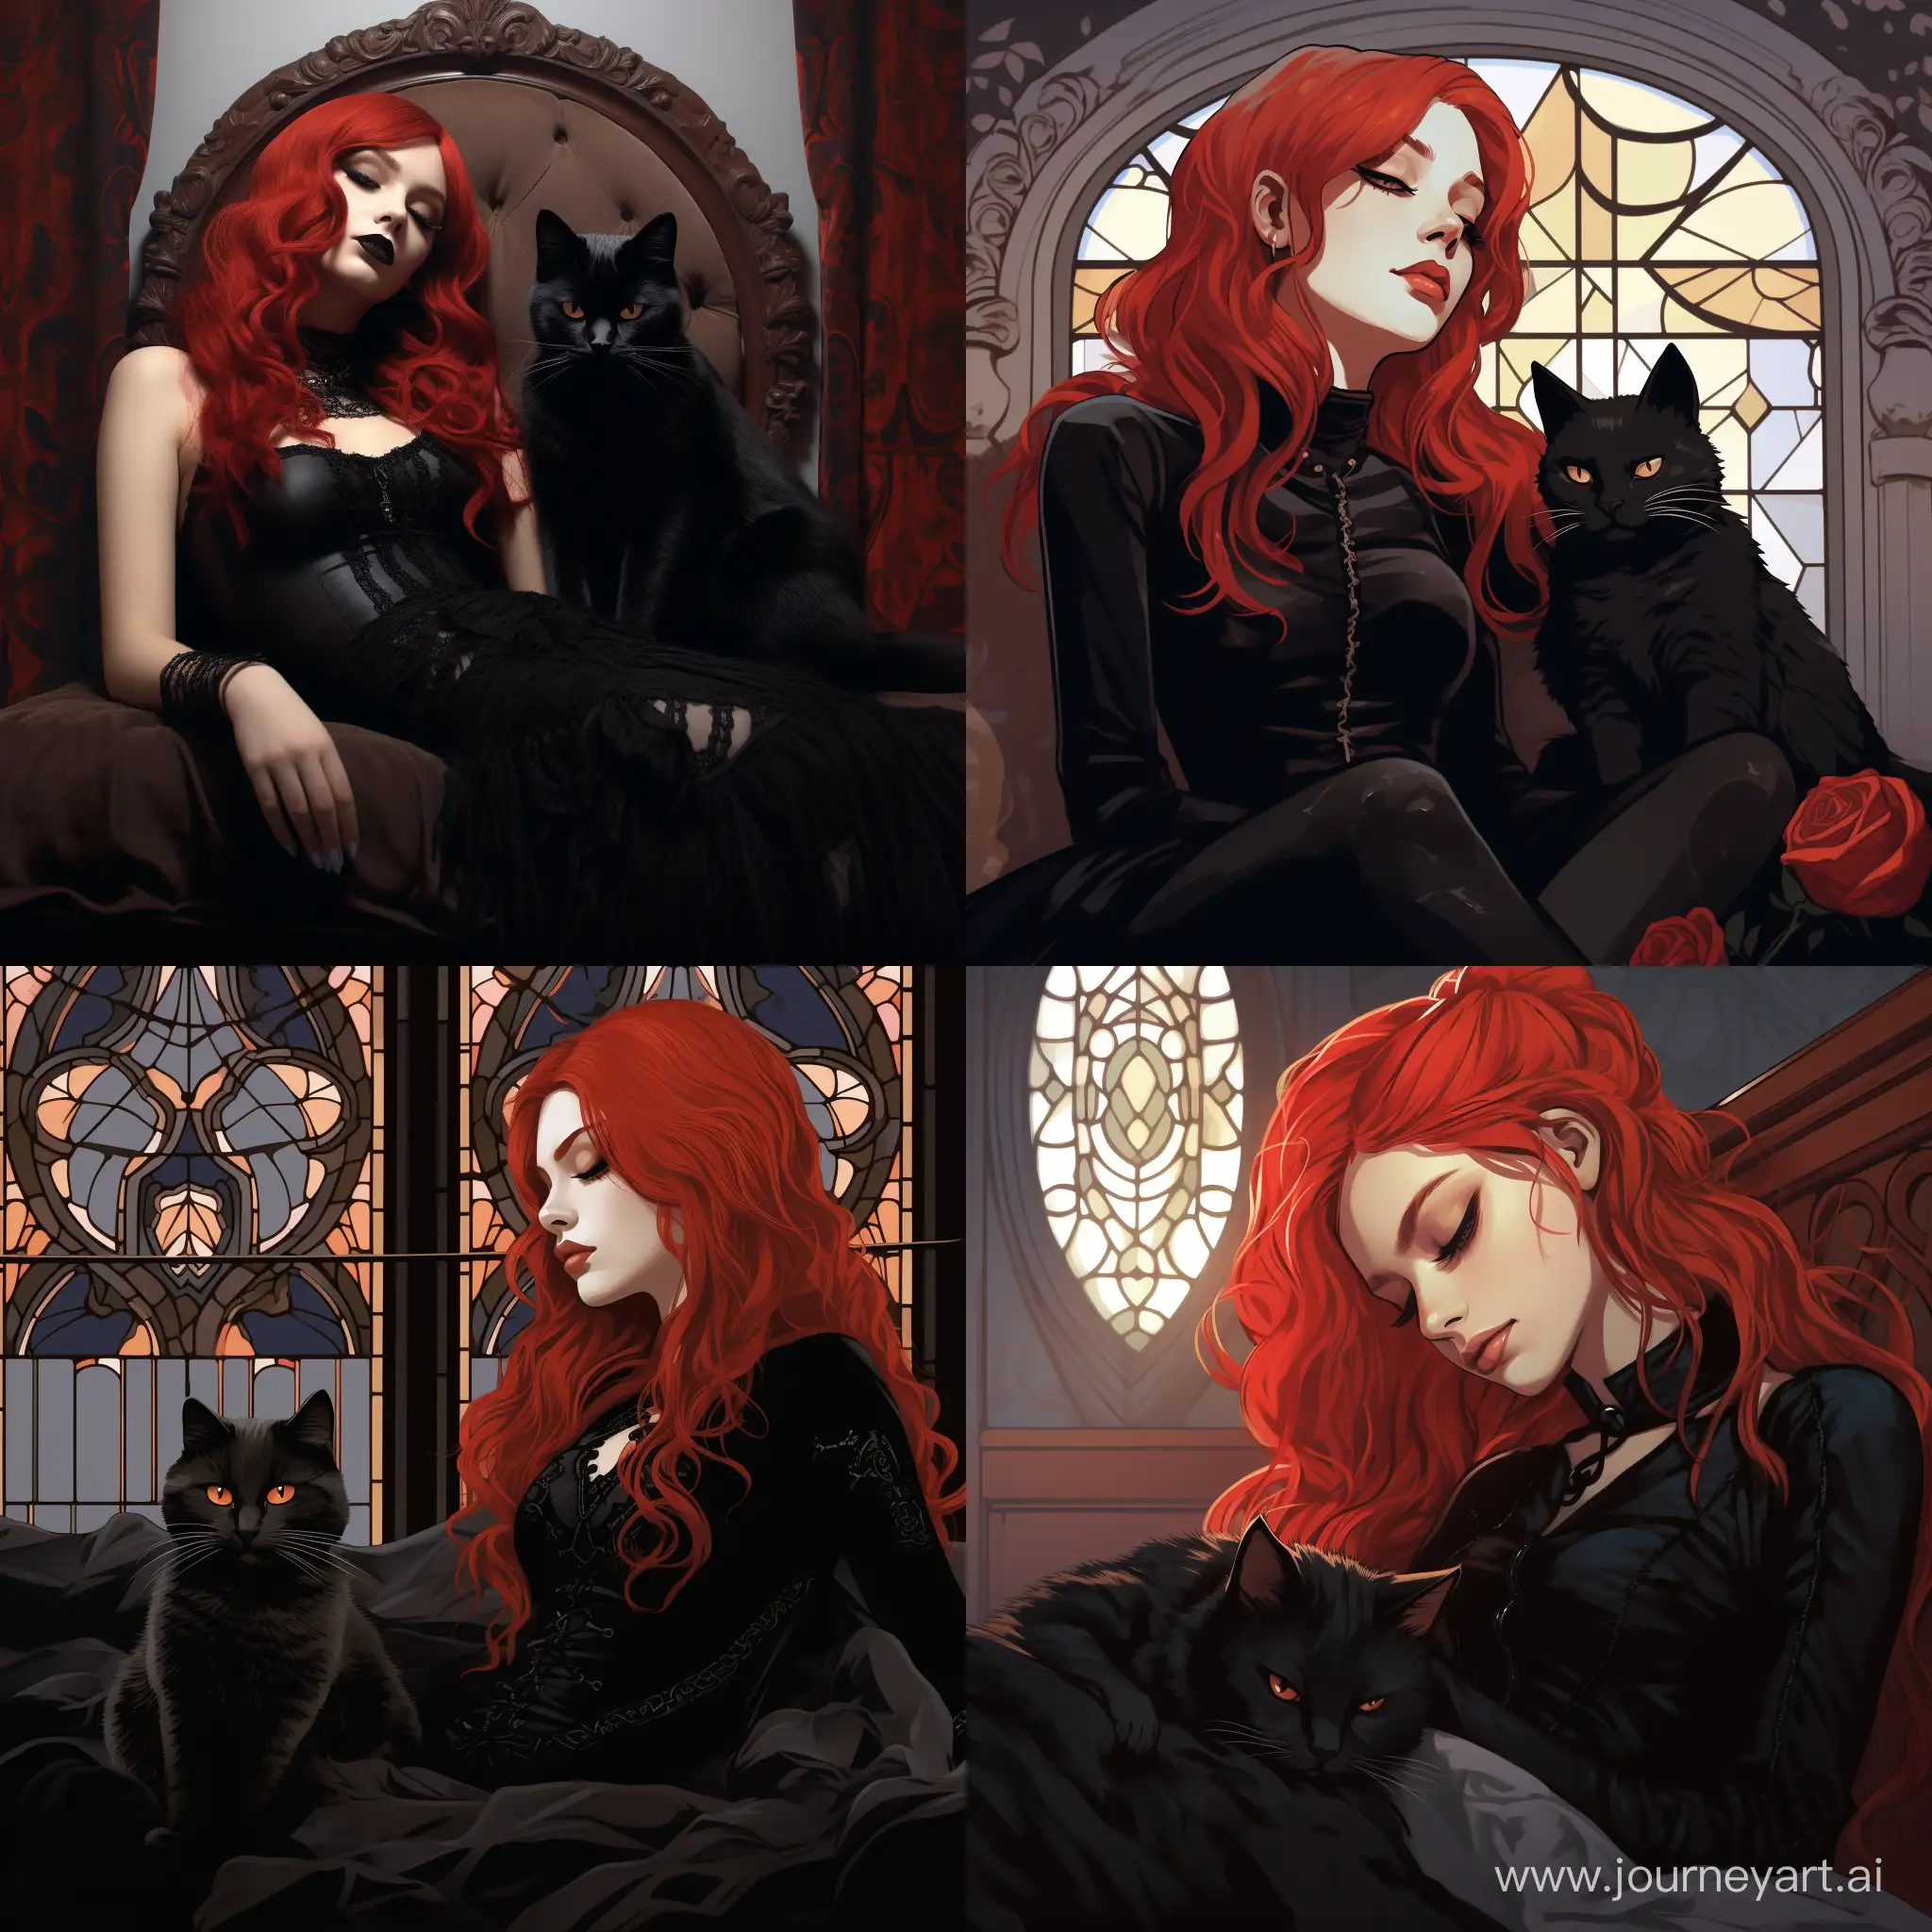 Enchanting-RedHaired-Gothic-Girl-Sleeping-Beside-a-Stylish-Gothic-Cat